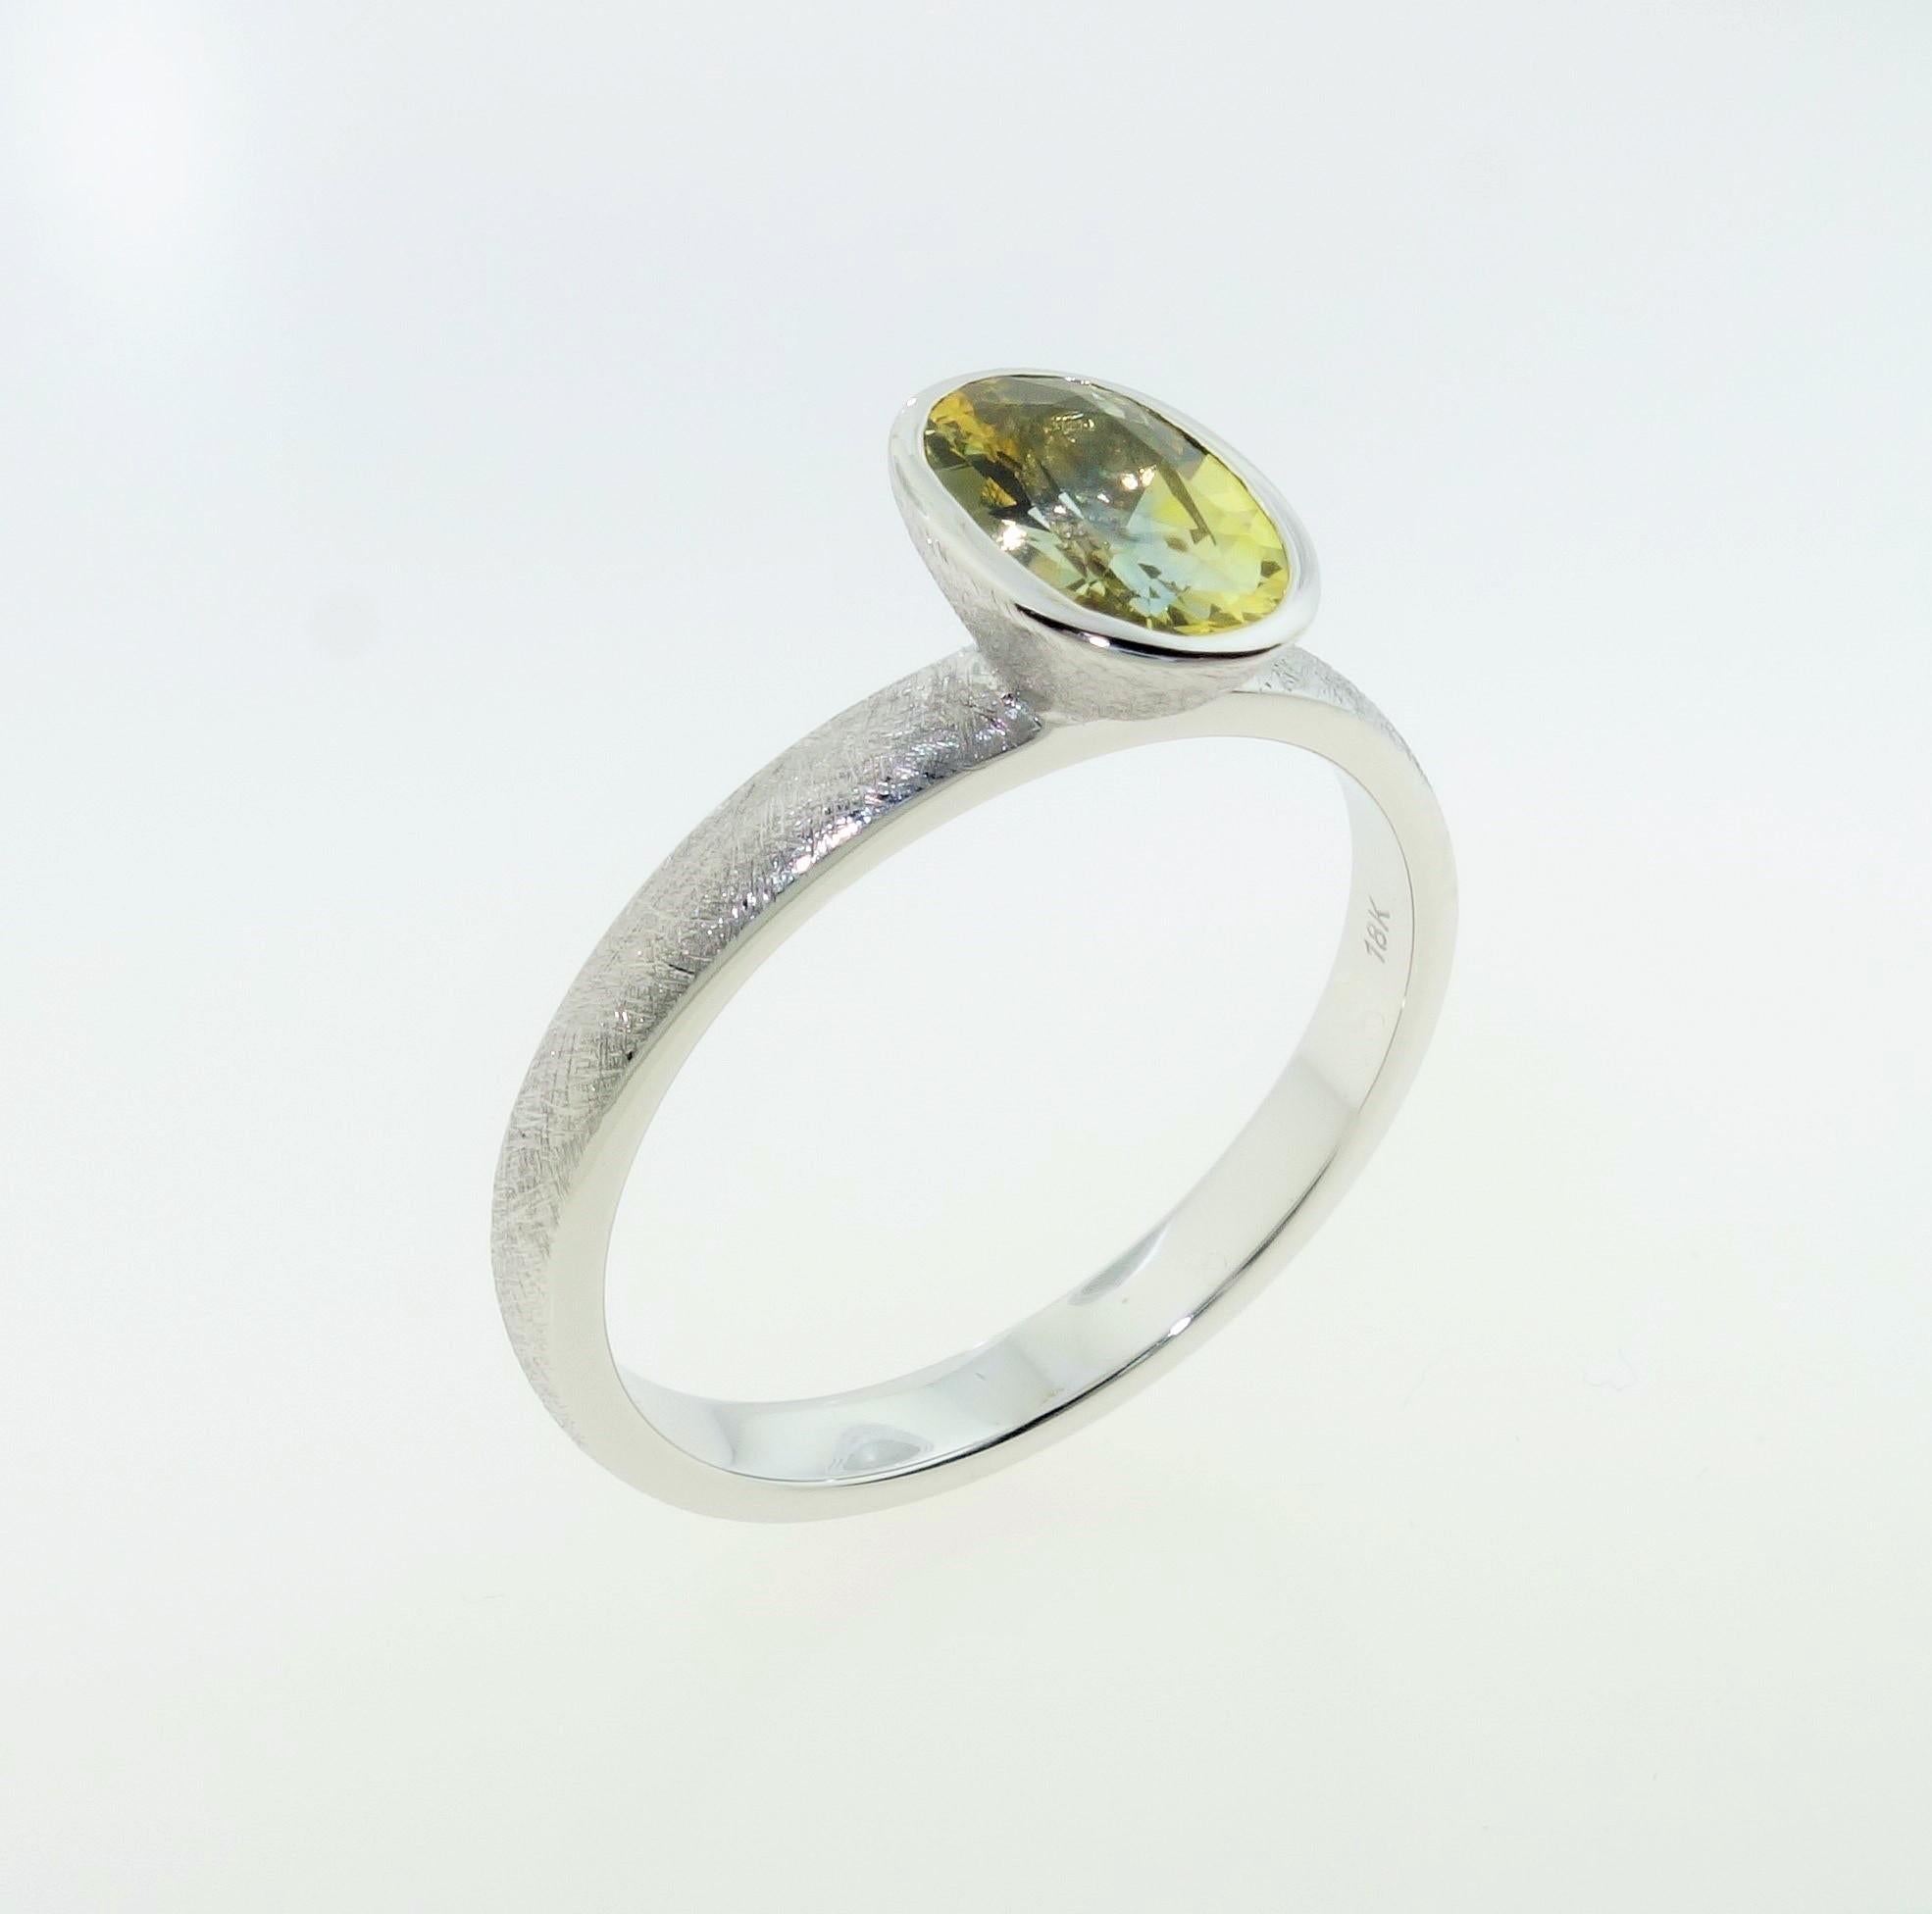 Simply Beautiful, Elegant and finely detailed Stacking Ring, set with an oval Yellow Sapphire, weighing approx. 1.03 Carats and measuring 8.0mm x 5.1mm. Hand crafted and Hand Textured in 18 Karat Yellow Gold. Ring size 8; we offer ring re-sizing.